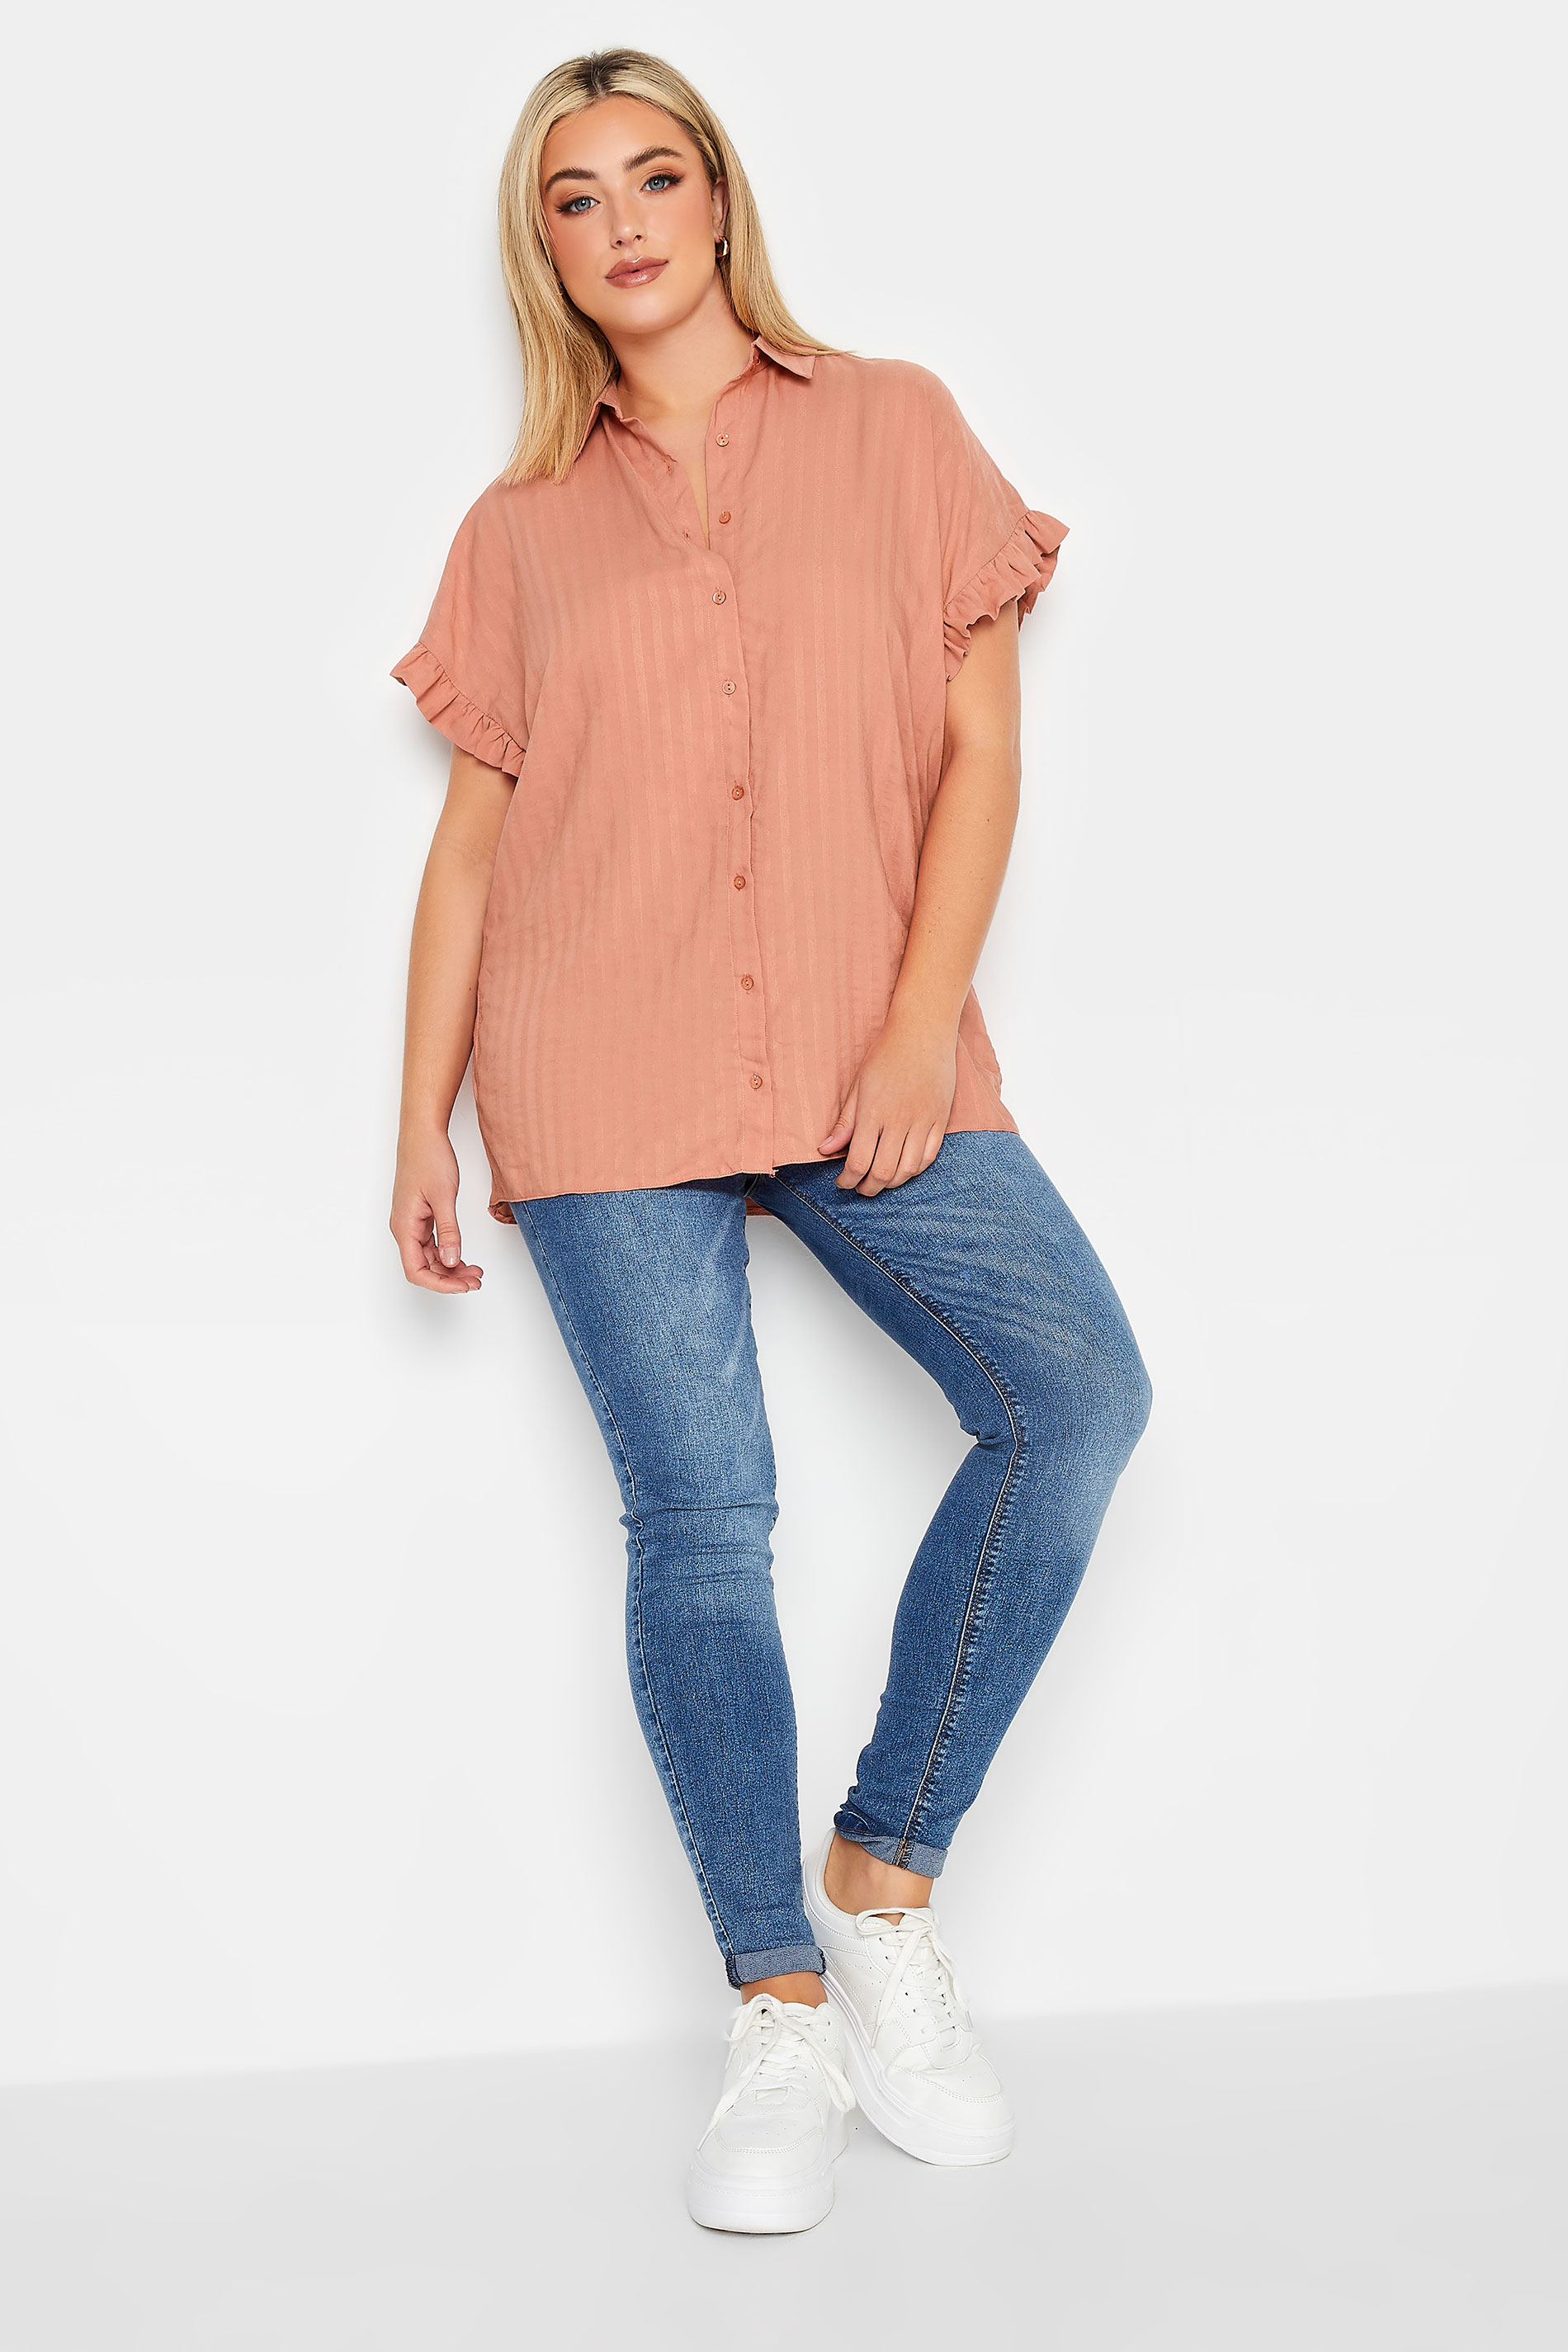 YOURS Plus Size Coral Orange Frill Sleeve Collared Shirt | Yours Clothing 2